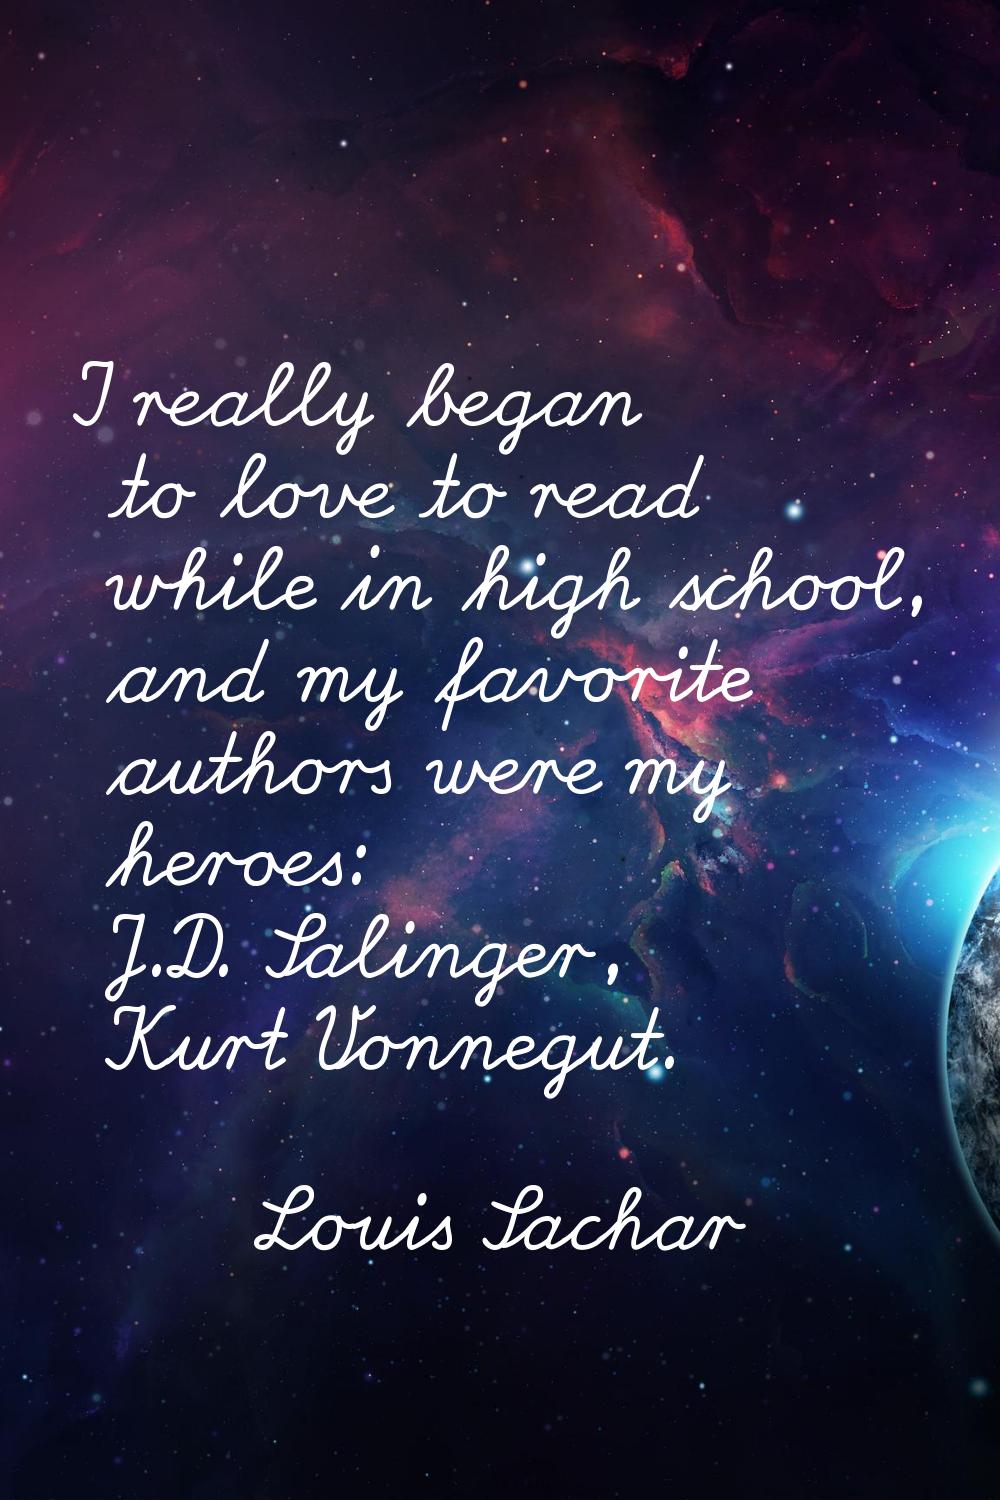 I really began to love to read while in high school, and my favorite authors were my heroes: J.D. S